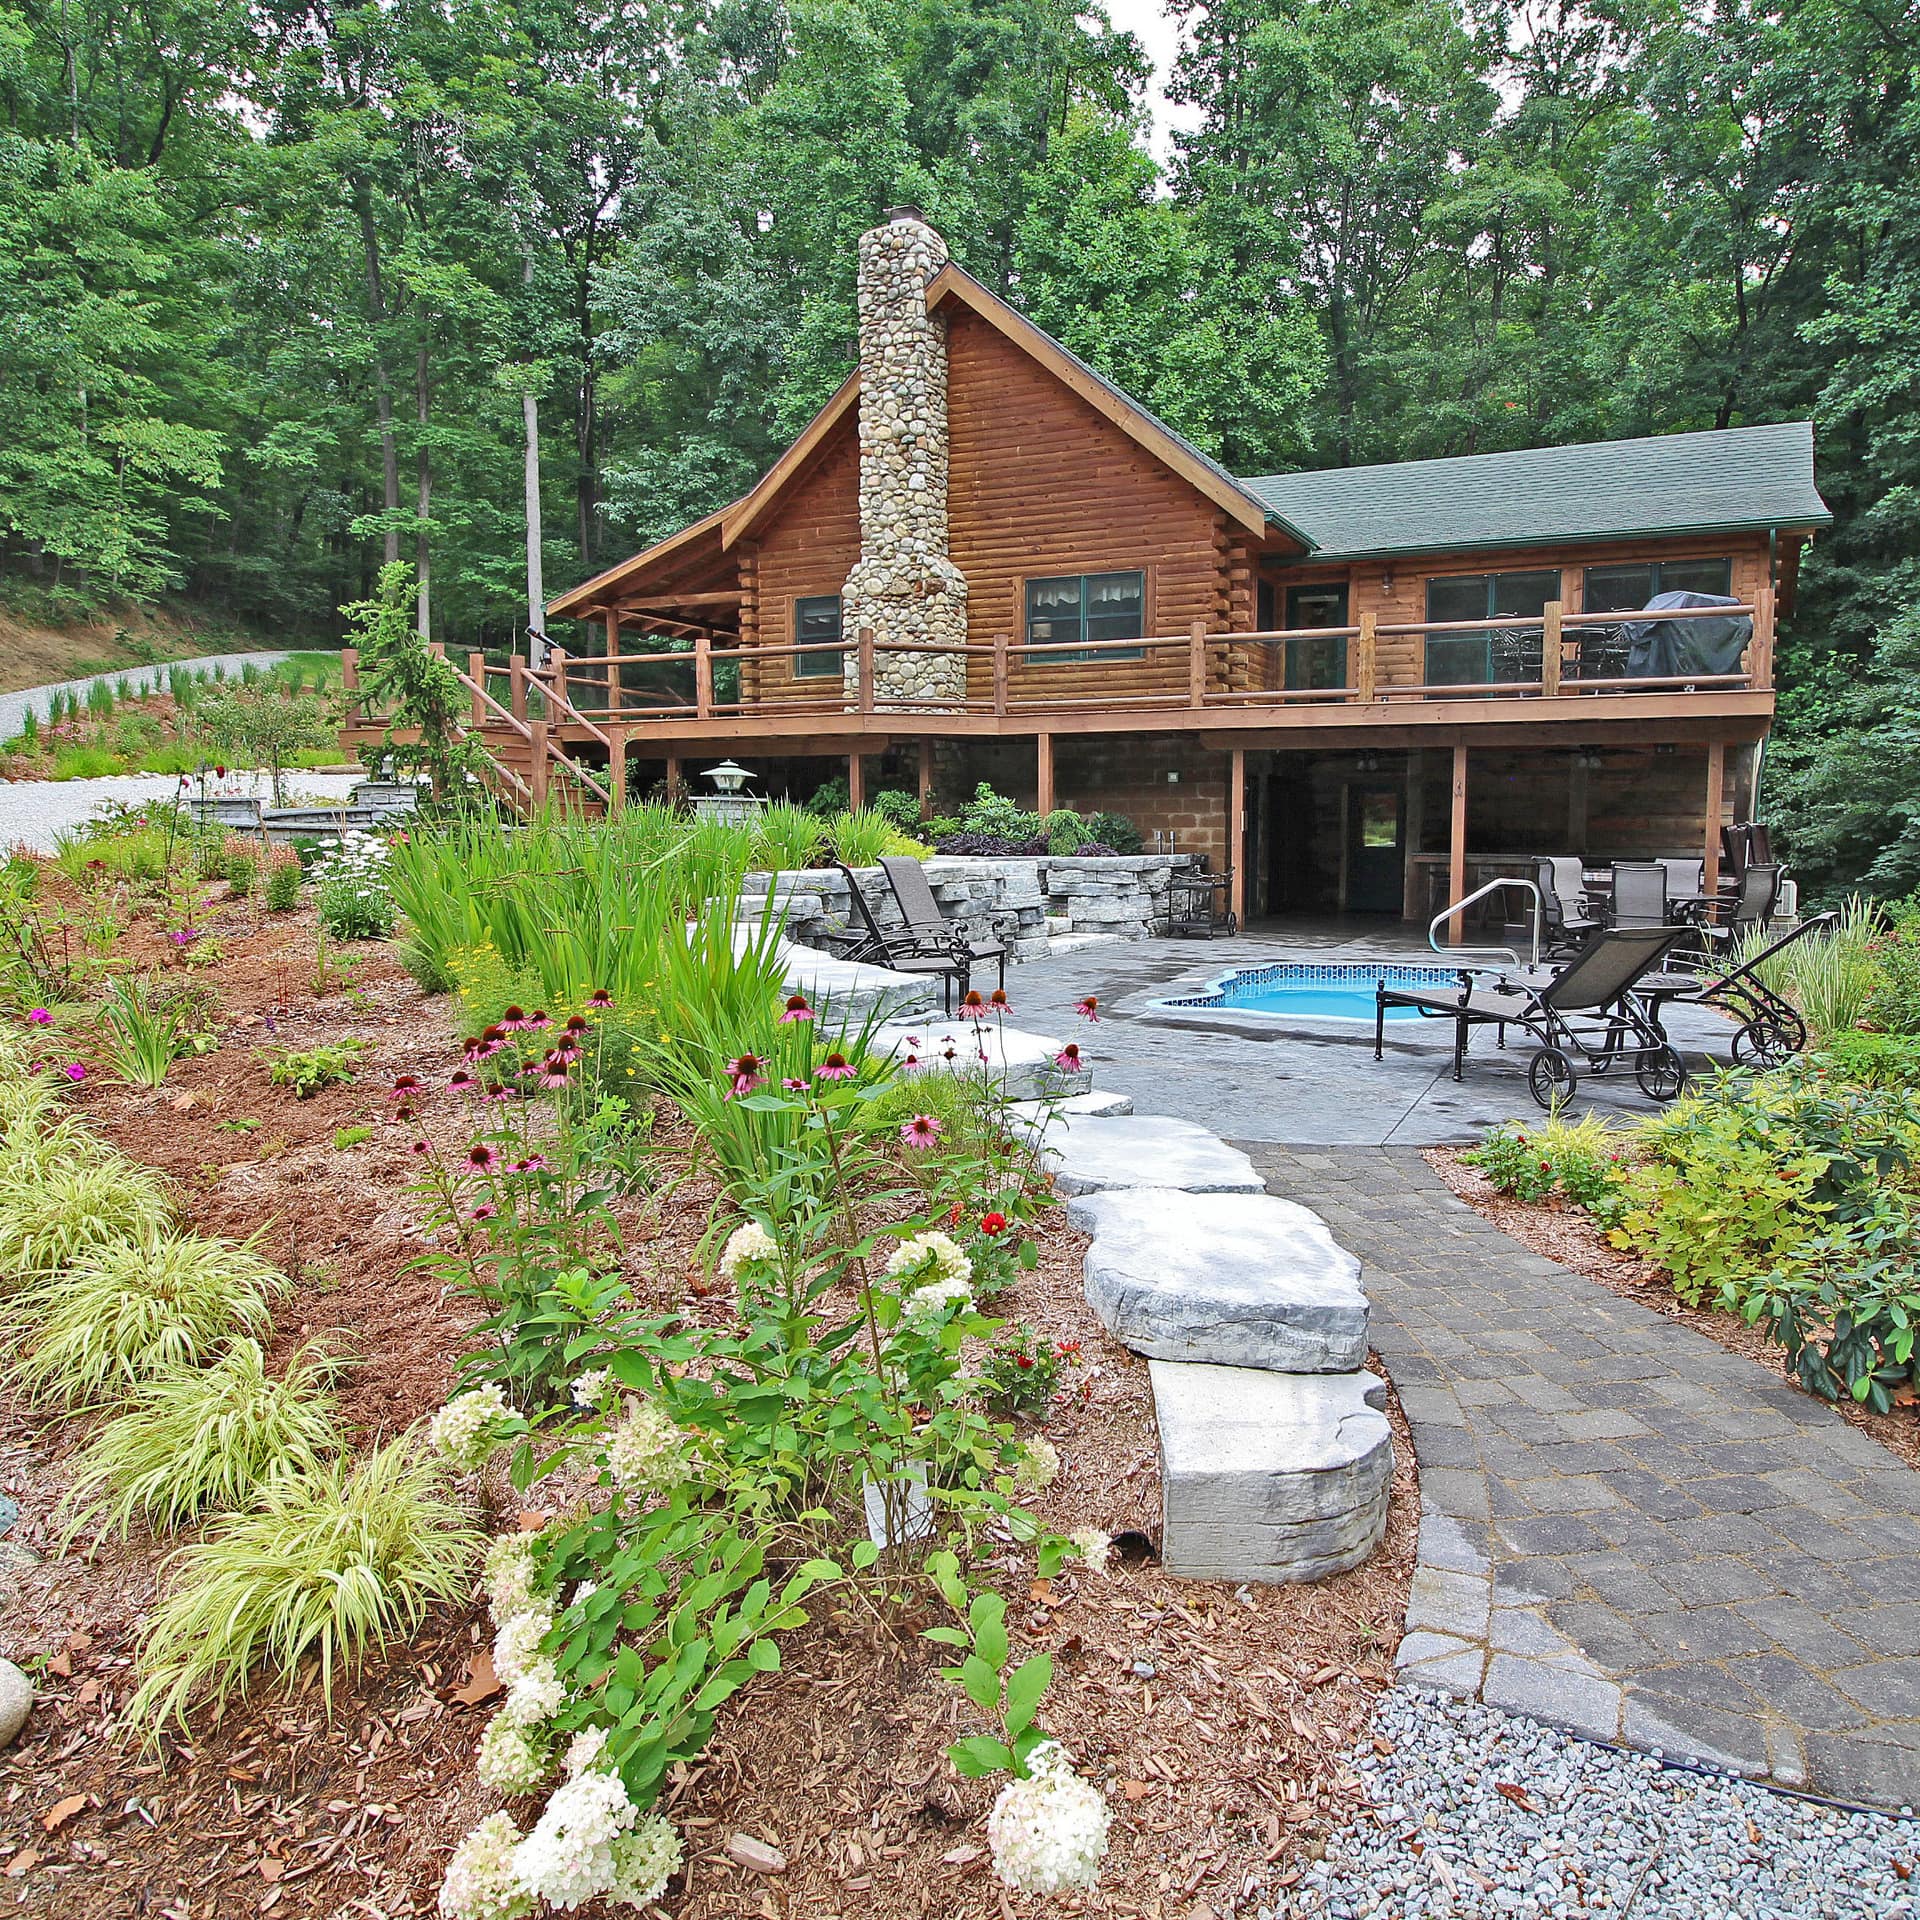 Luxury log cabin with a swimming pool